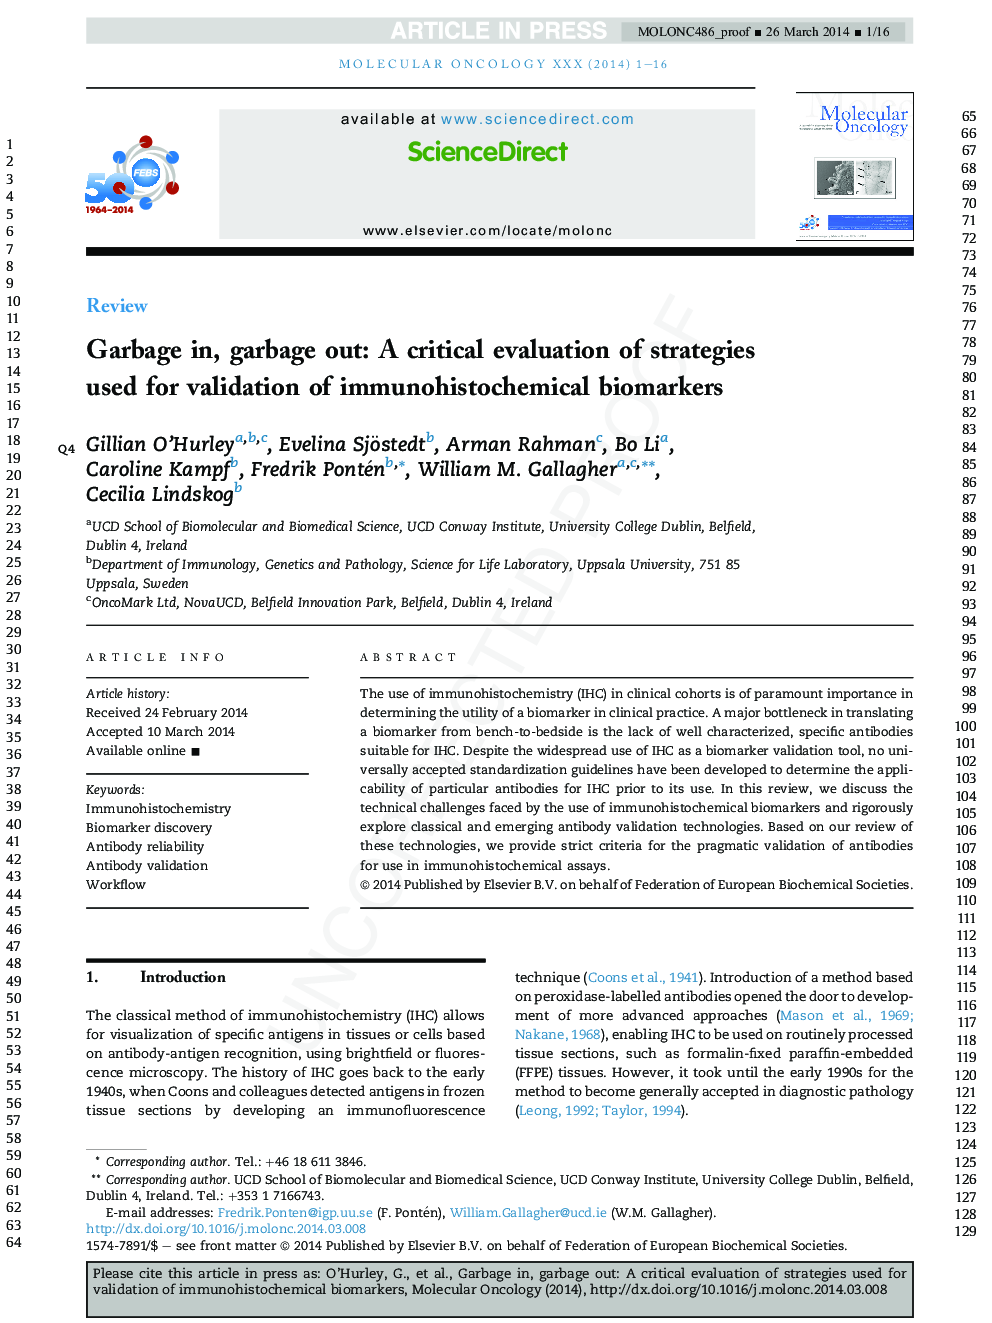 Garbage in, garbage out: A critical evaluation of strategies used for validation of immunohistochemical biomarkers